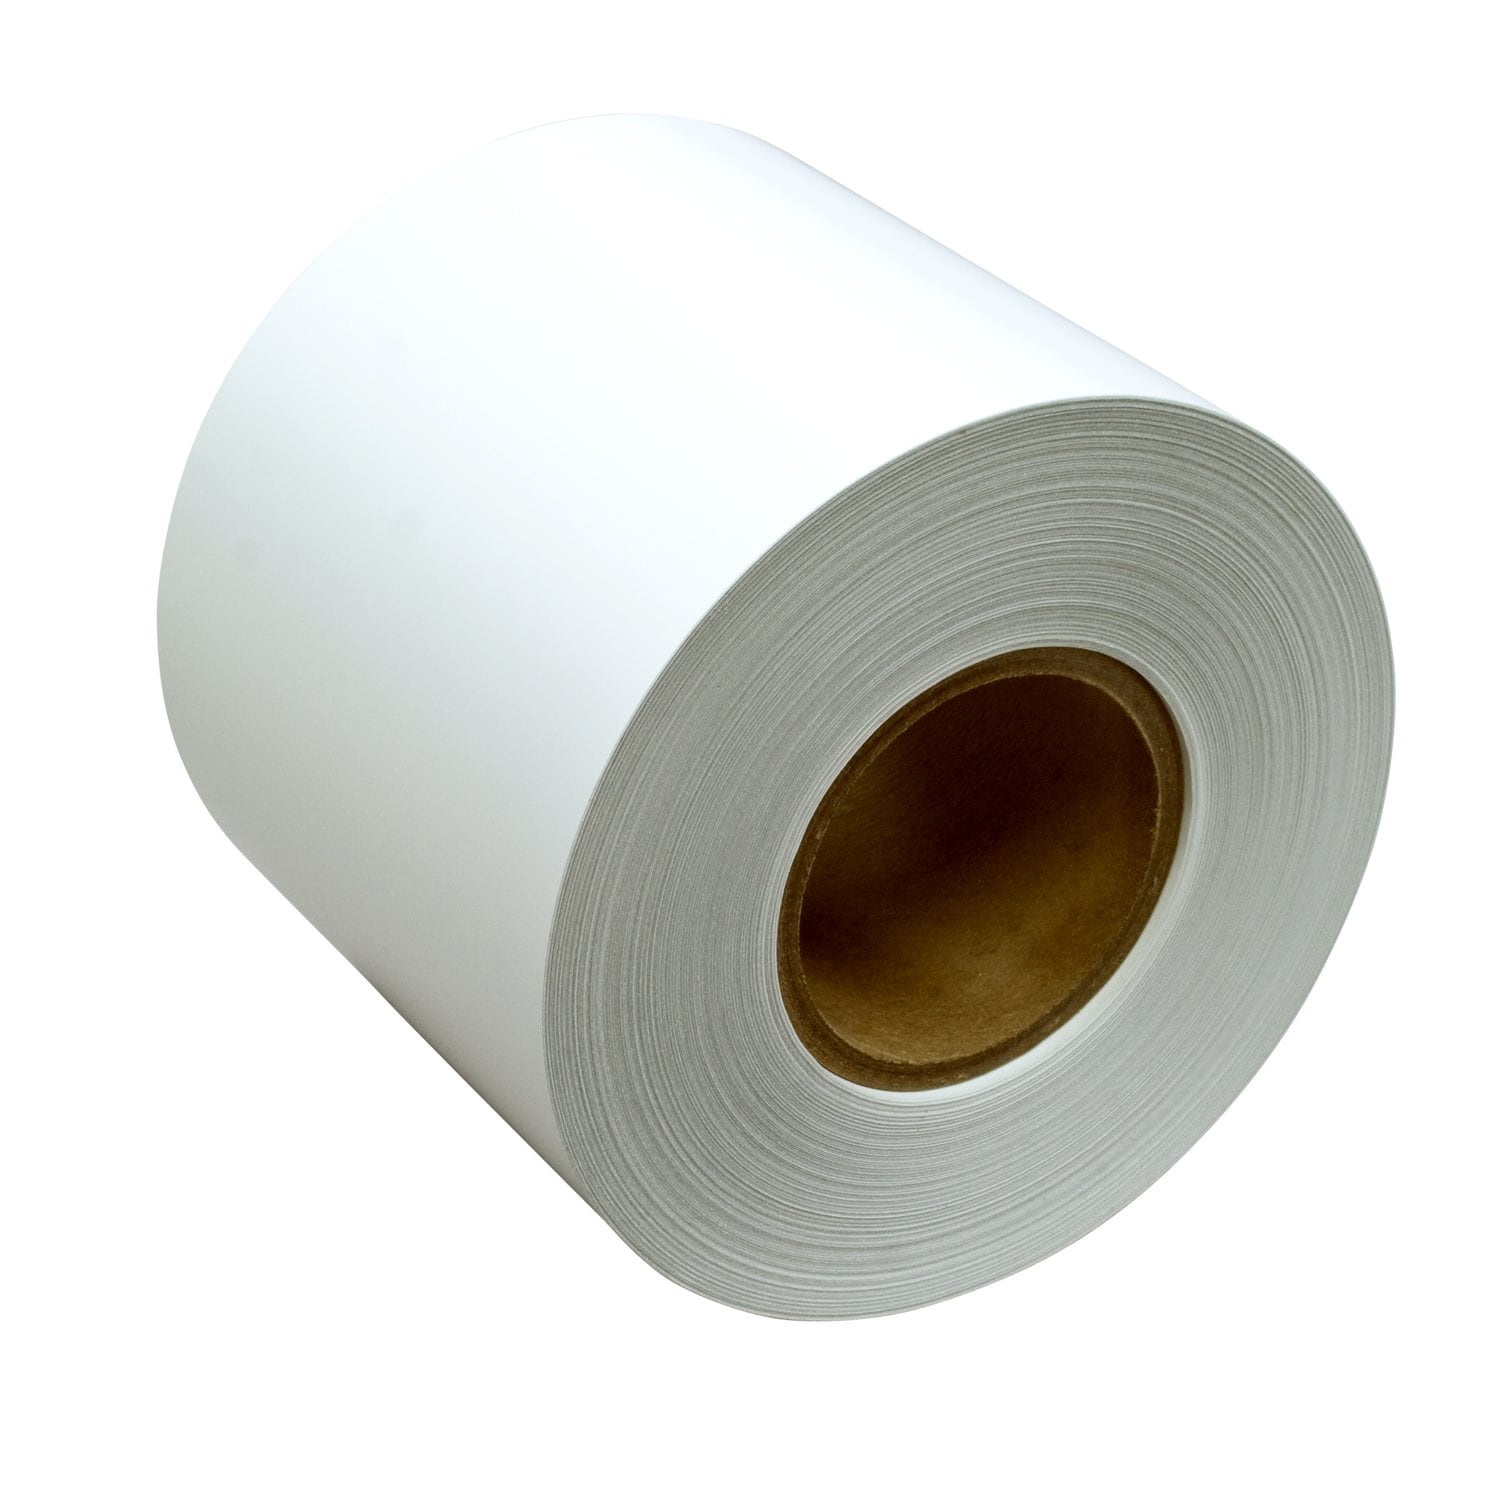 7100045896 - 3M Thermal Transfer Label Material 76716NA, White Polypropylene, Roll,
Config